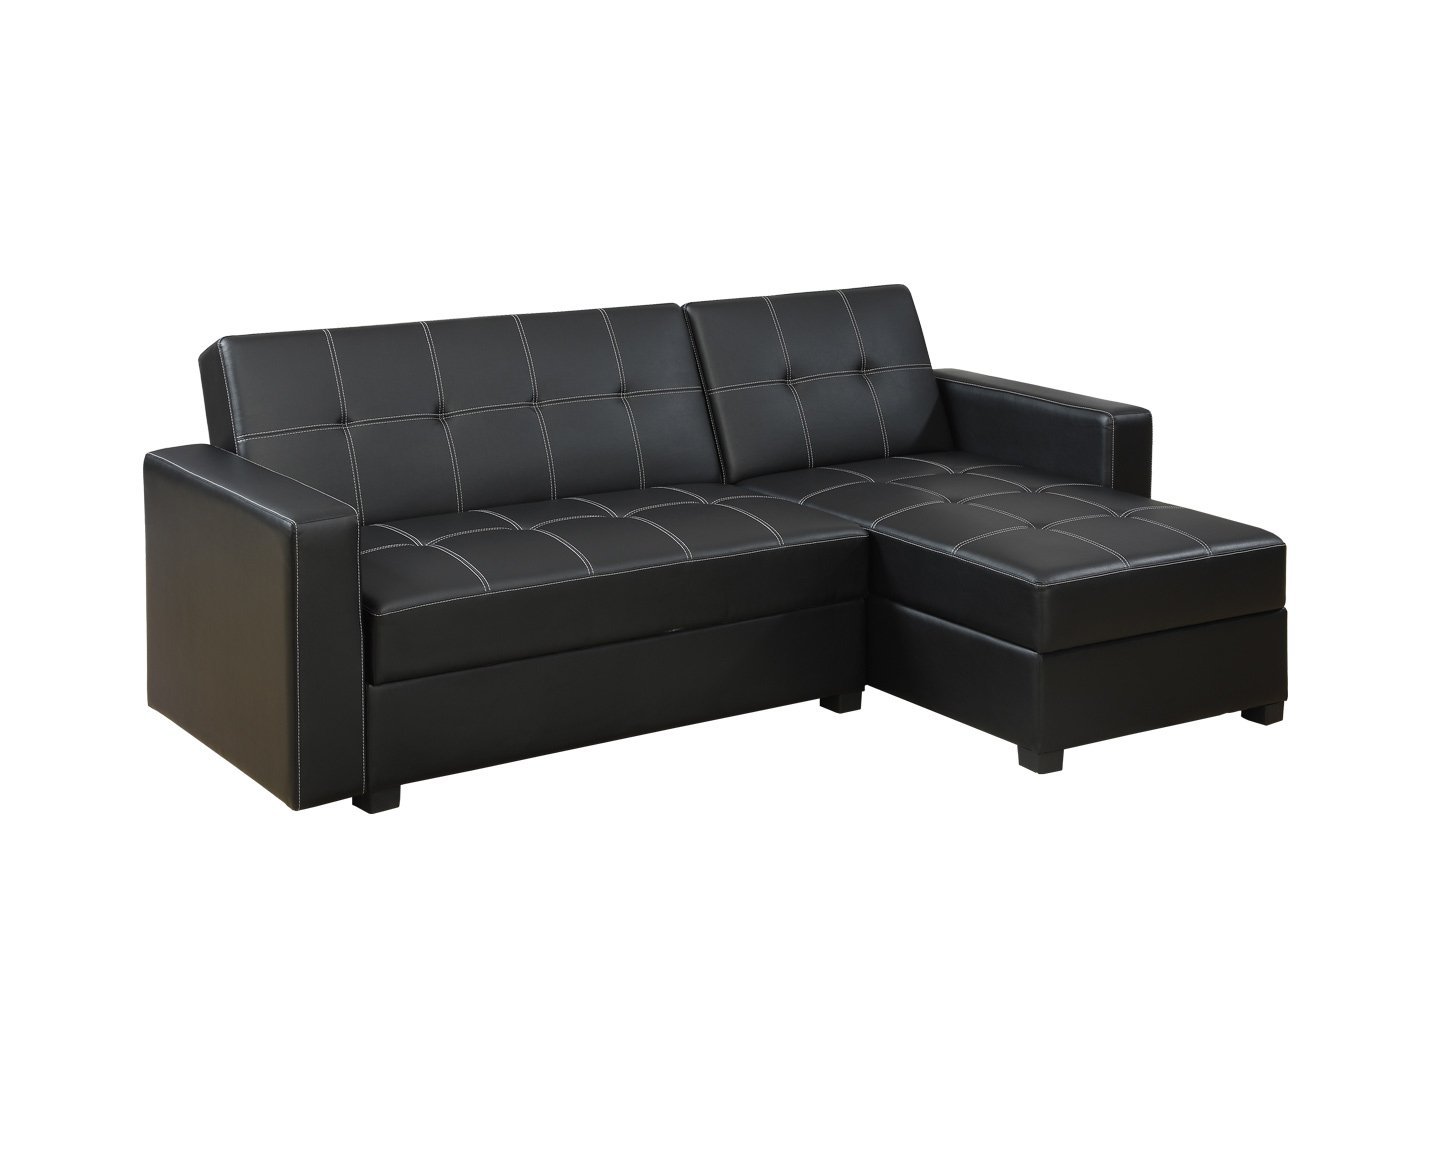 Poundex F7894 Bobkona Medora Faux Leather Left or Right Hand Chaise Adjustable Sectional with Compartment, Black